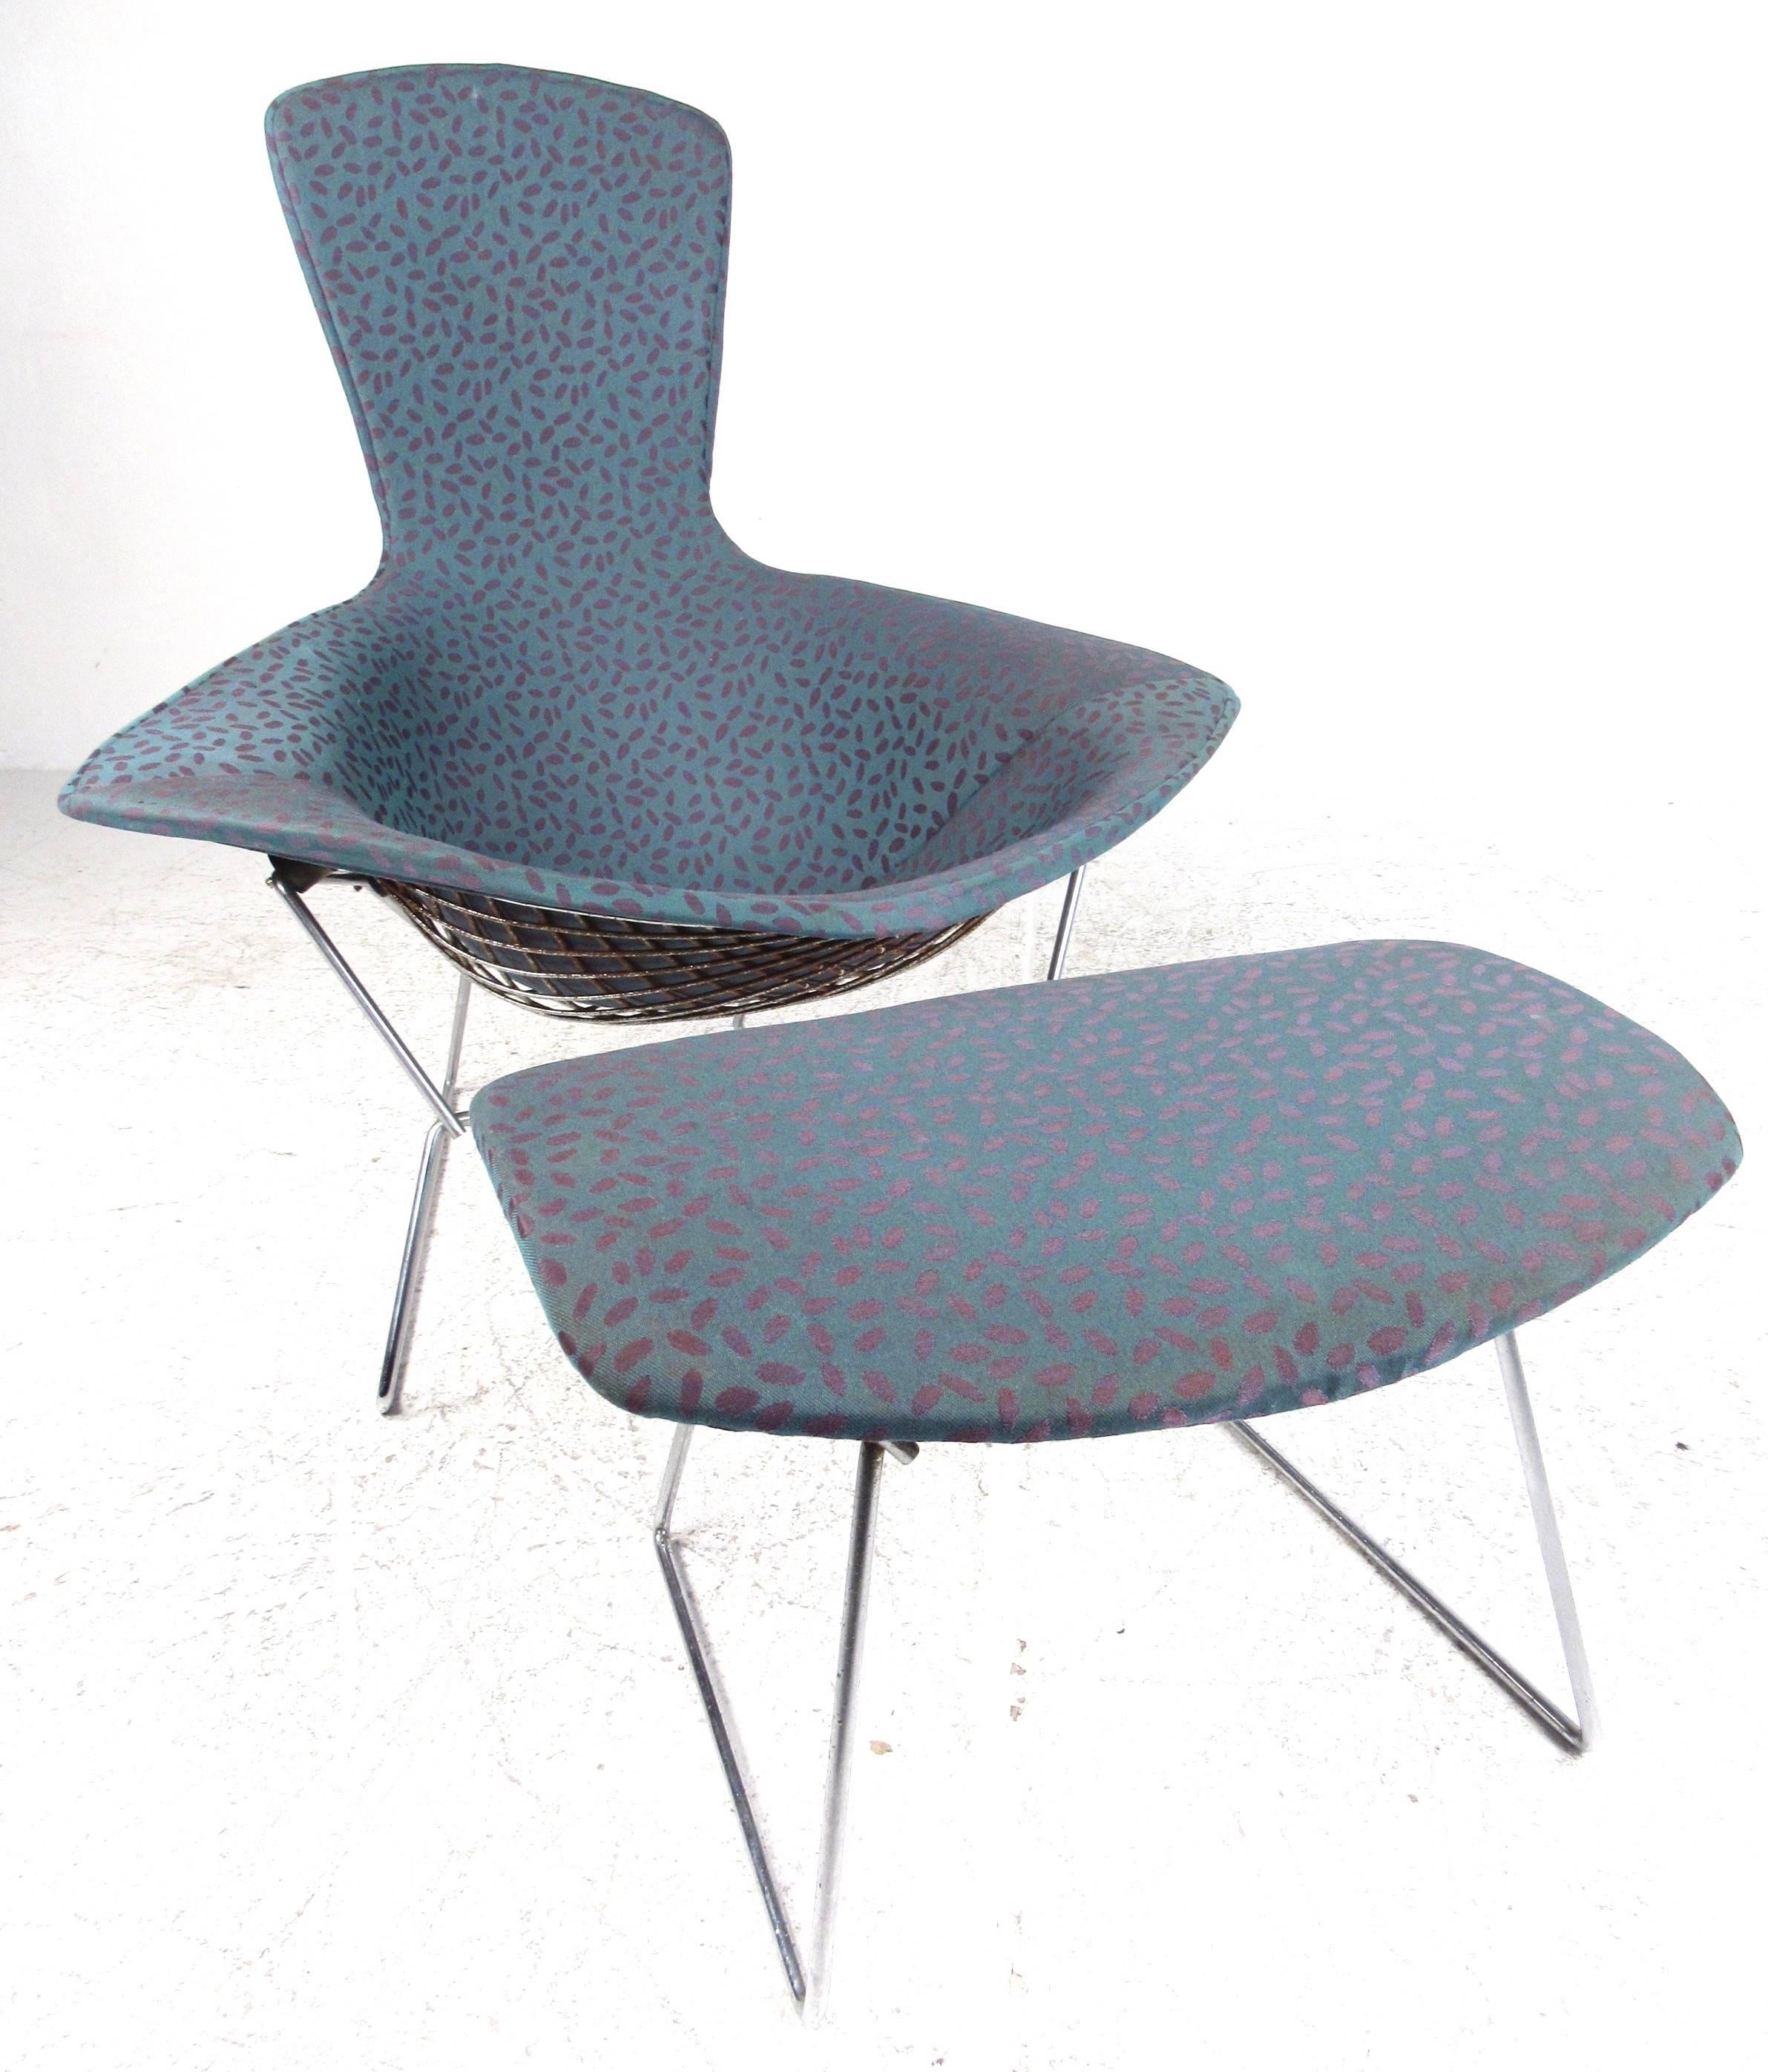 This Mid-Century Modern sculptural metal lounge chair designed by Harry Bertoia for knoll comes complete with matching ottoman. Stylish modern design set apart by unique angles and comfortable ergonomic seat shape. Vintage fabric covering lightly